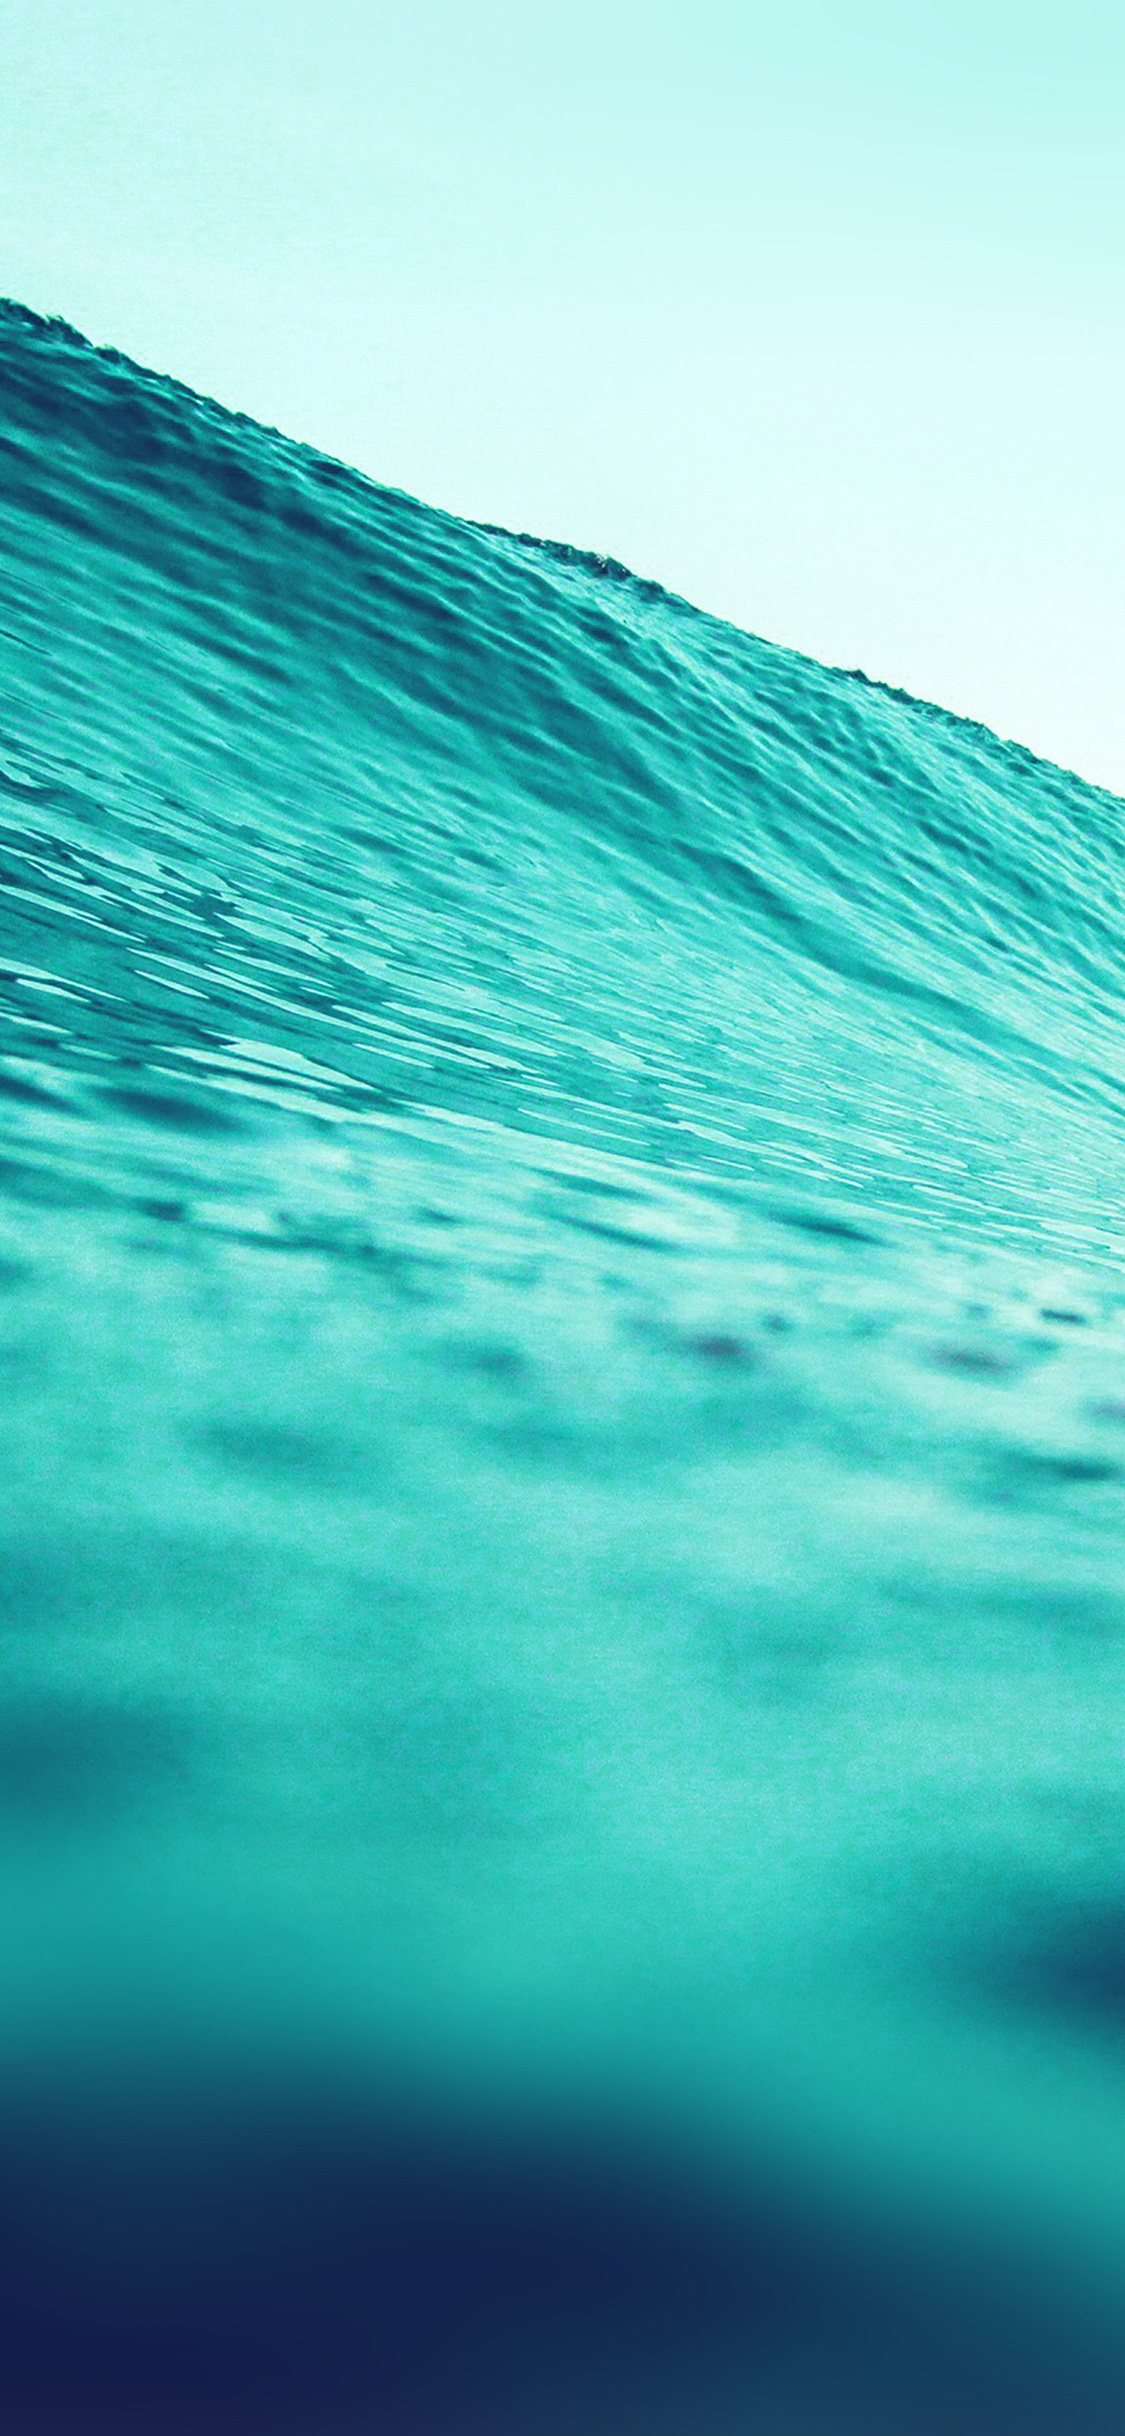 iPhone X wallpaper. wave sea blue green water nature